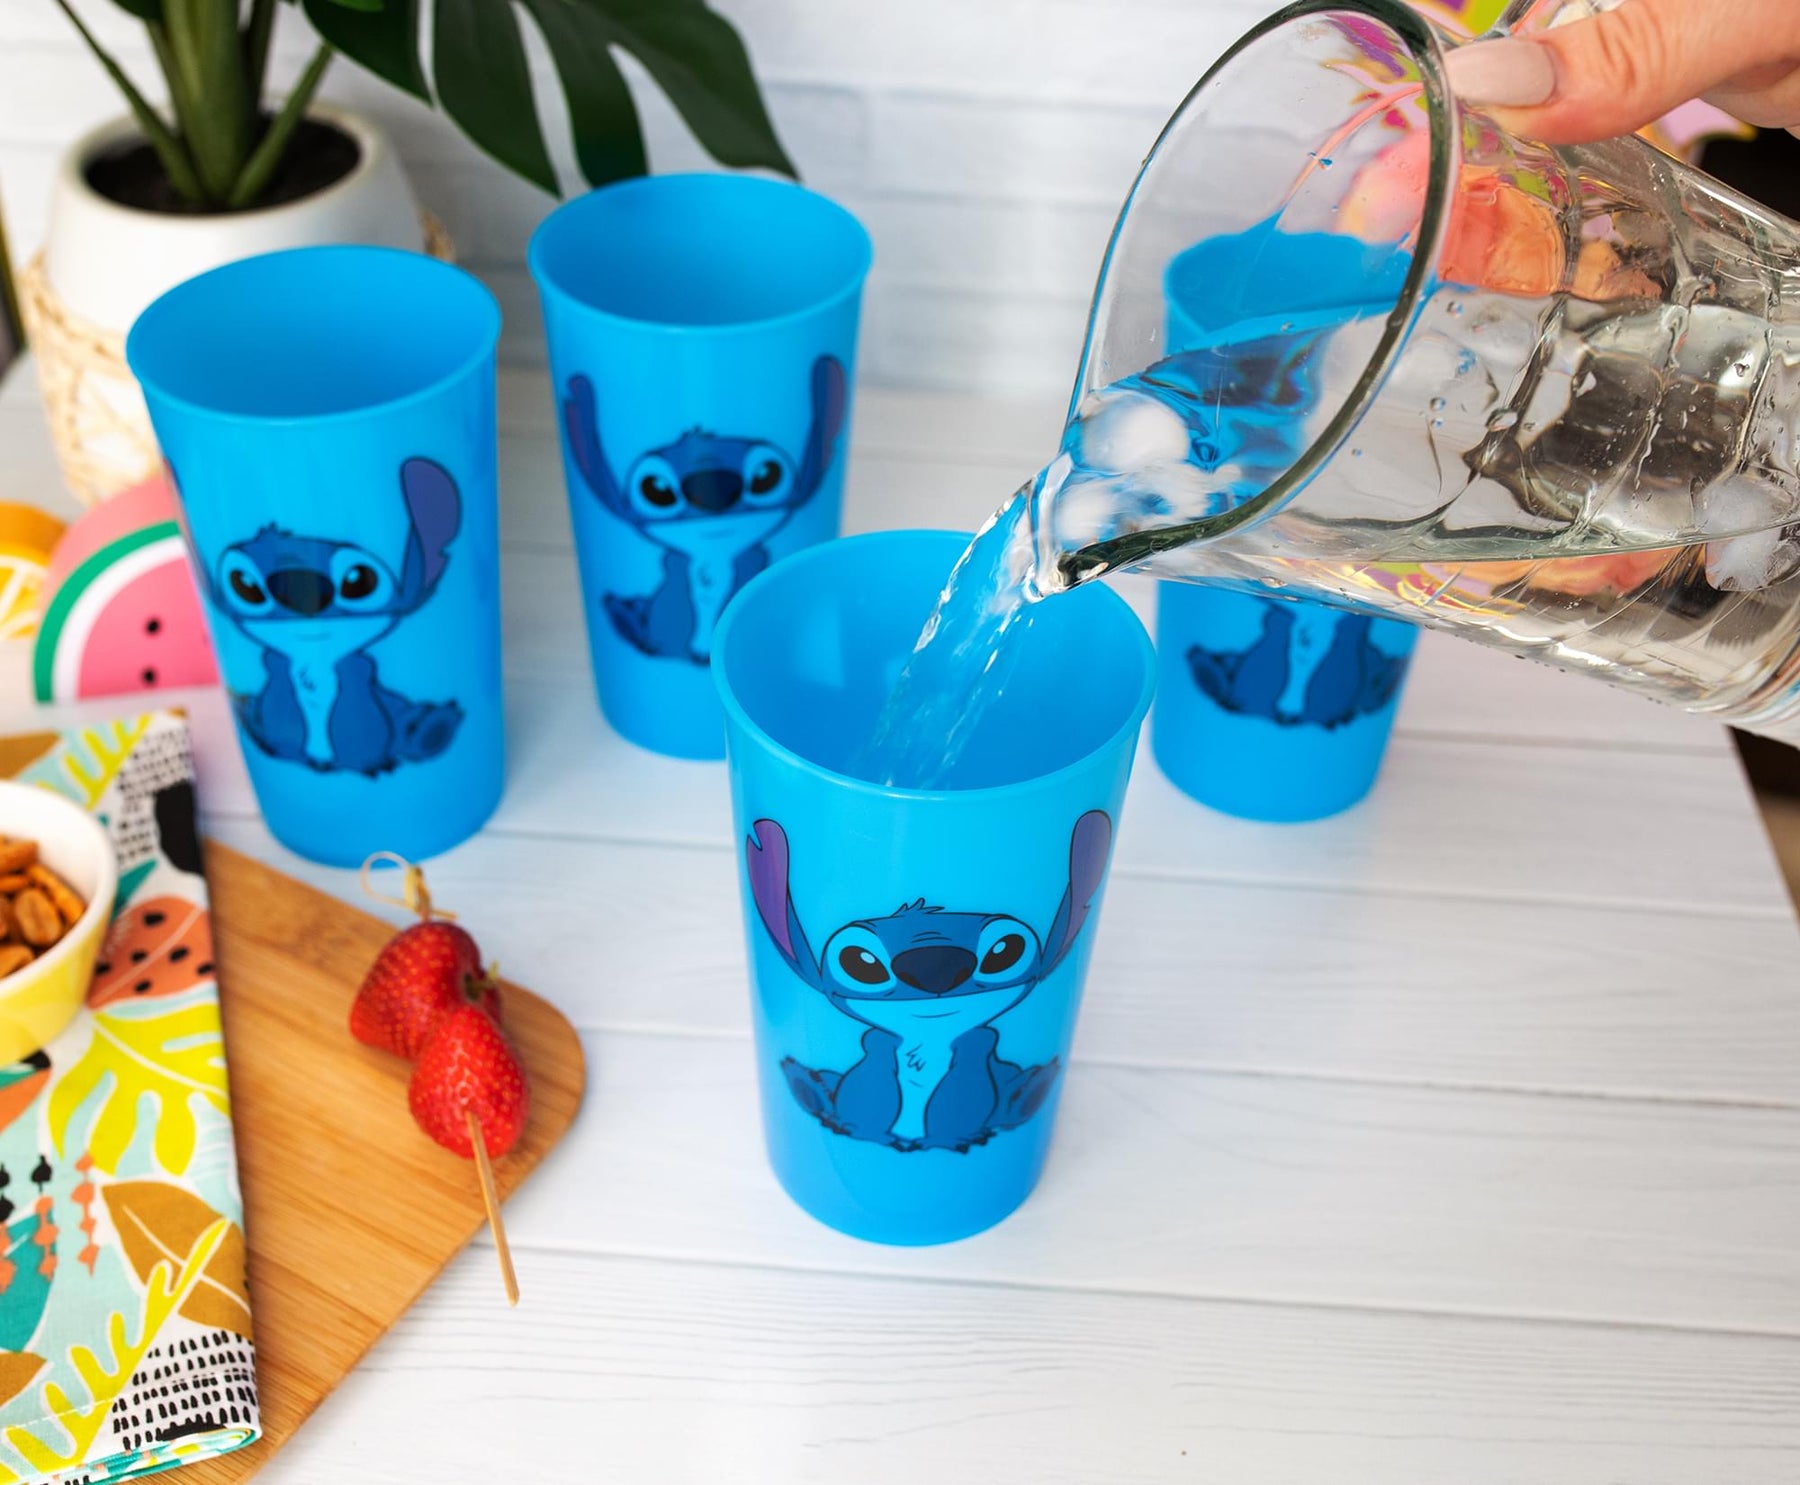 DISNEY Store TUMBLER Color CHANGING Straw STITCH Lilo & Stitch Cup  Authentic NEW